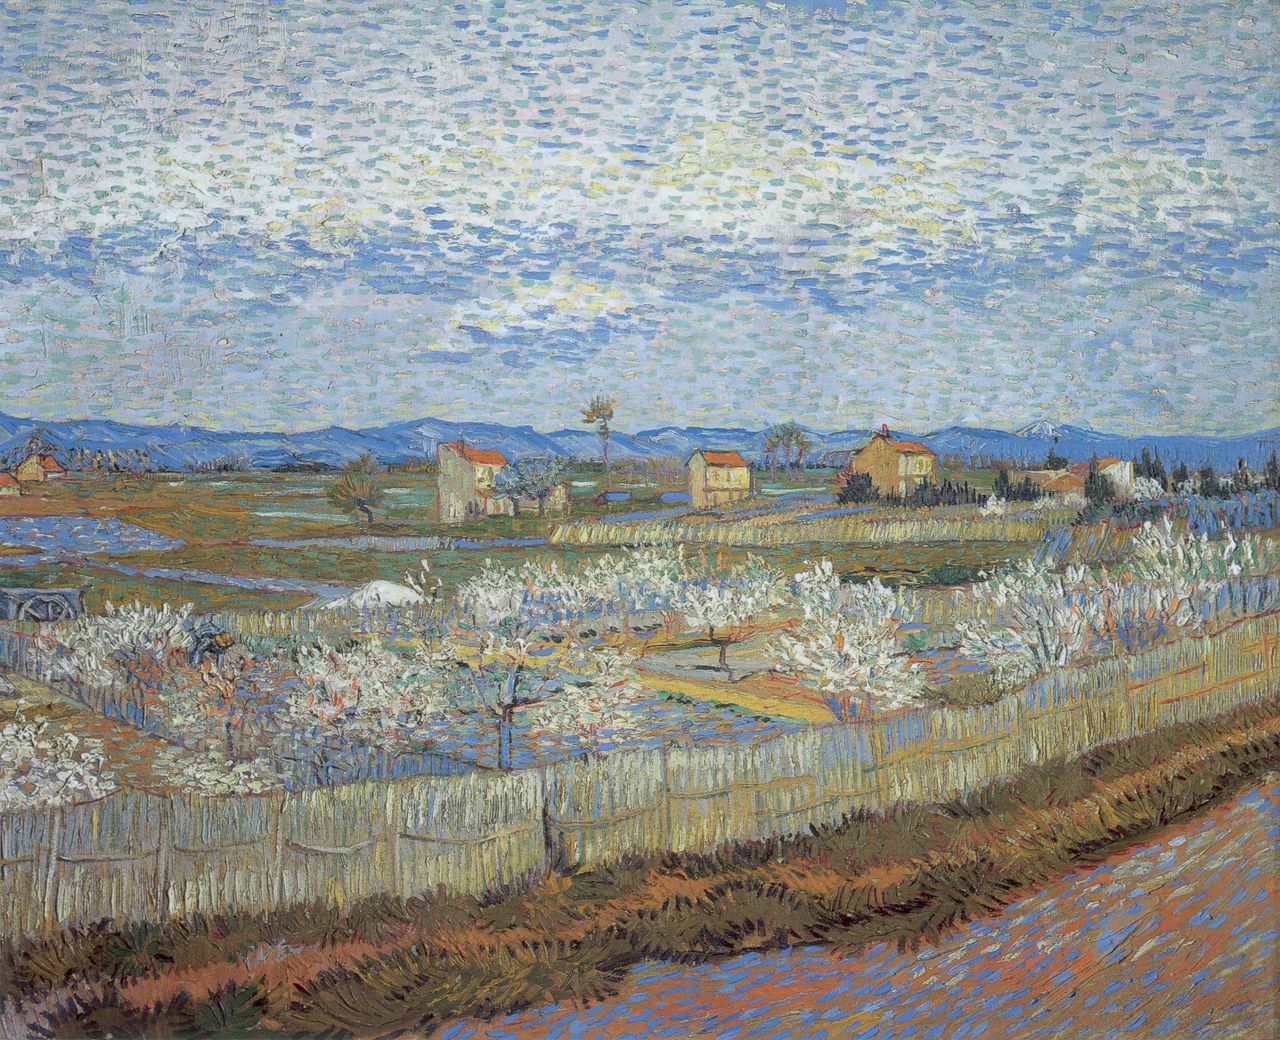 "La Crau with Peach Trees in Blossom" (1889) features motifs commonly found in Japanese art at the time, such as snow-capped mountains.